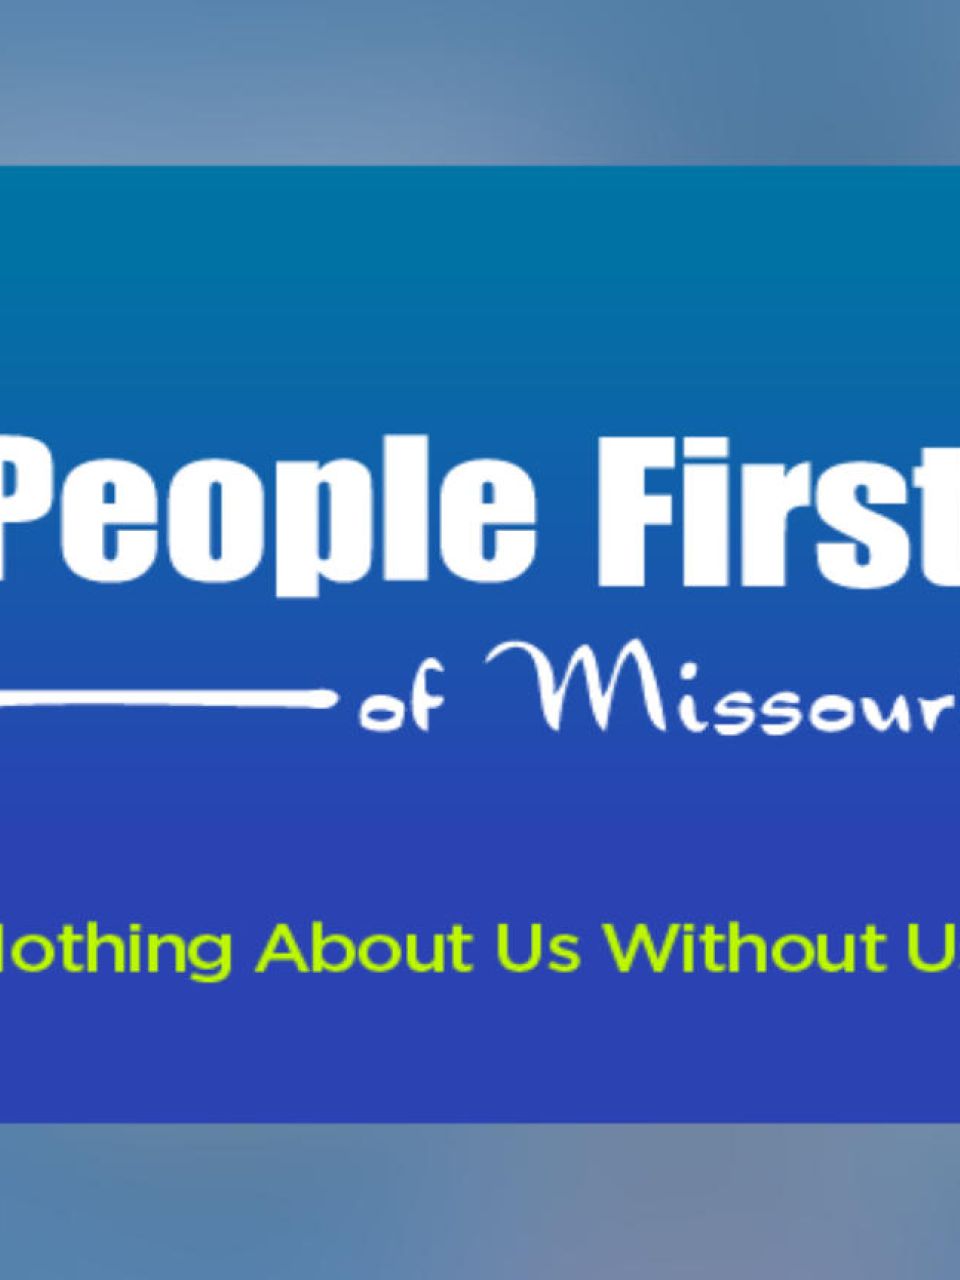 people first of missouri